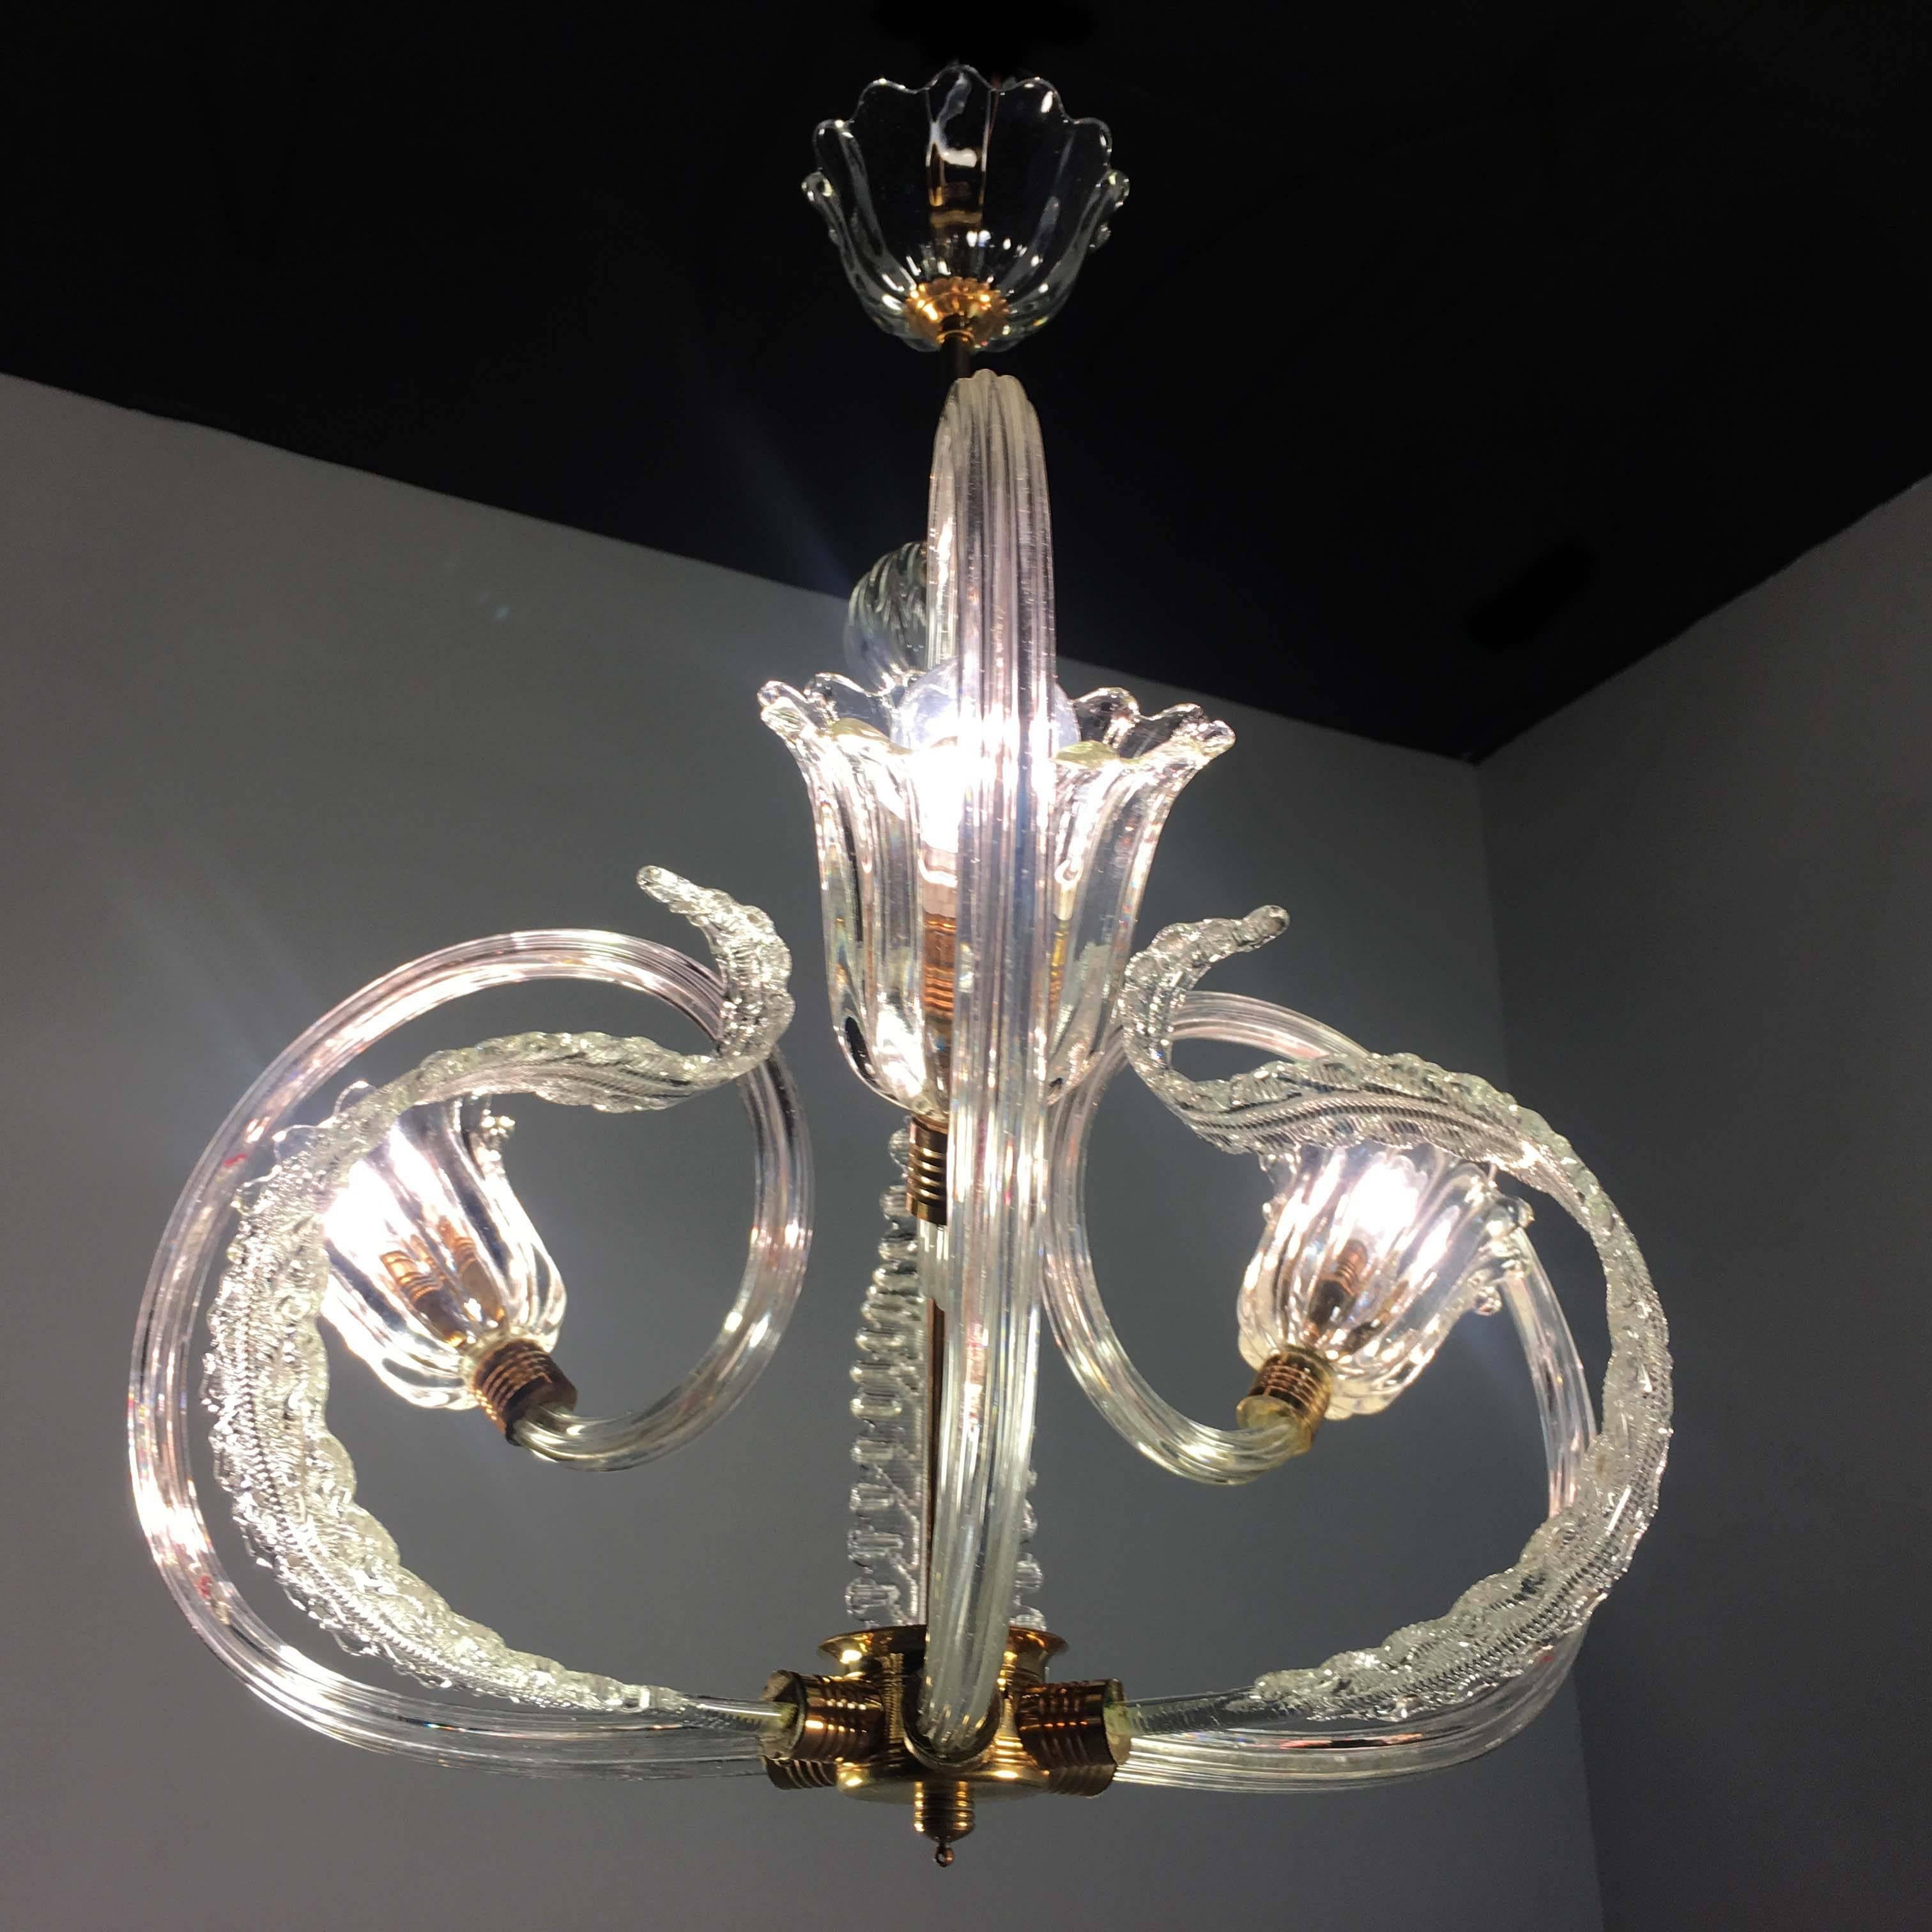 Charming Italian Chandelier by Barovier & Toso, Murano, 1940 For Sale 13